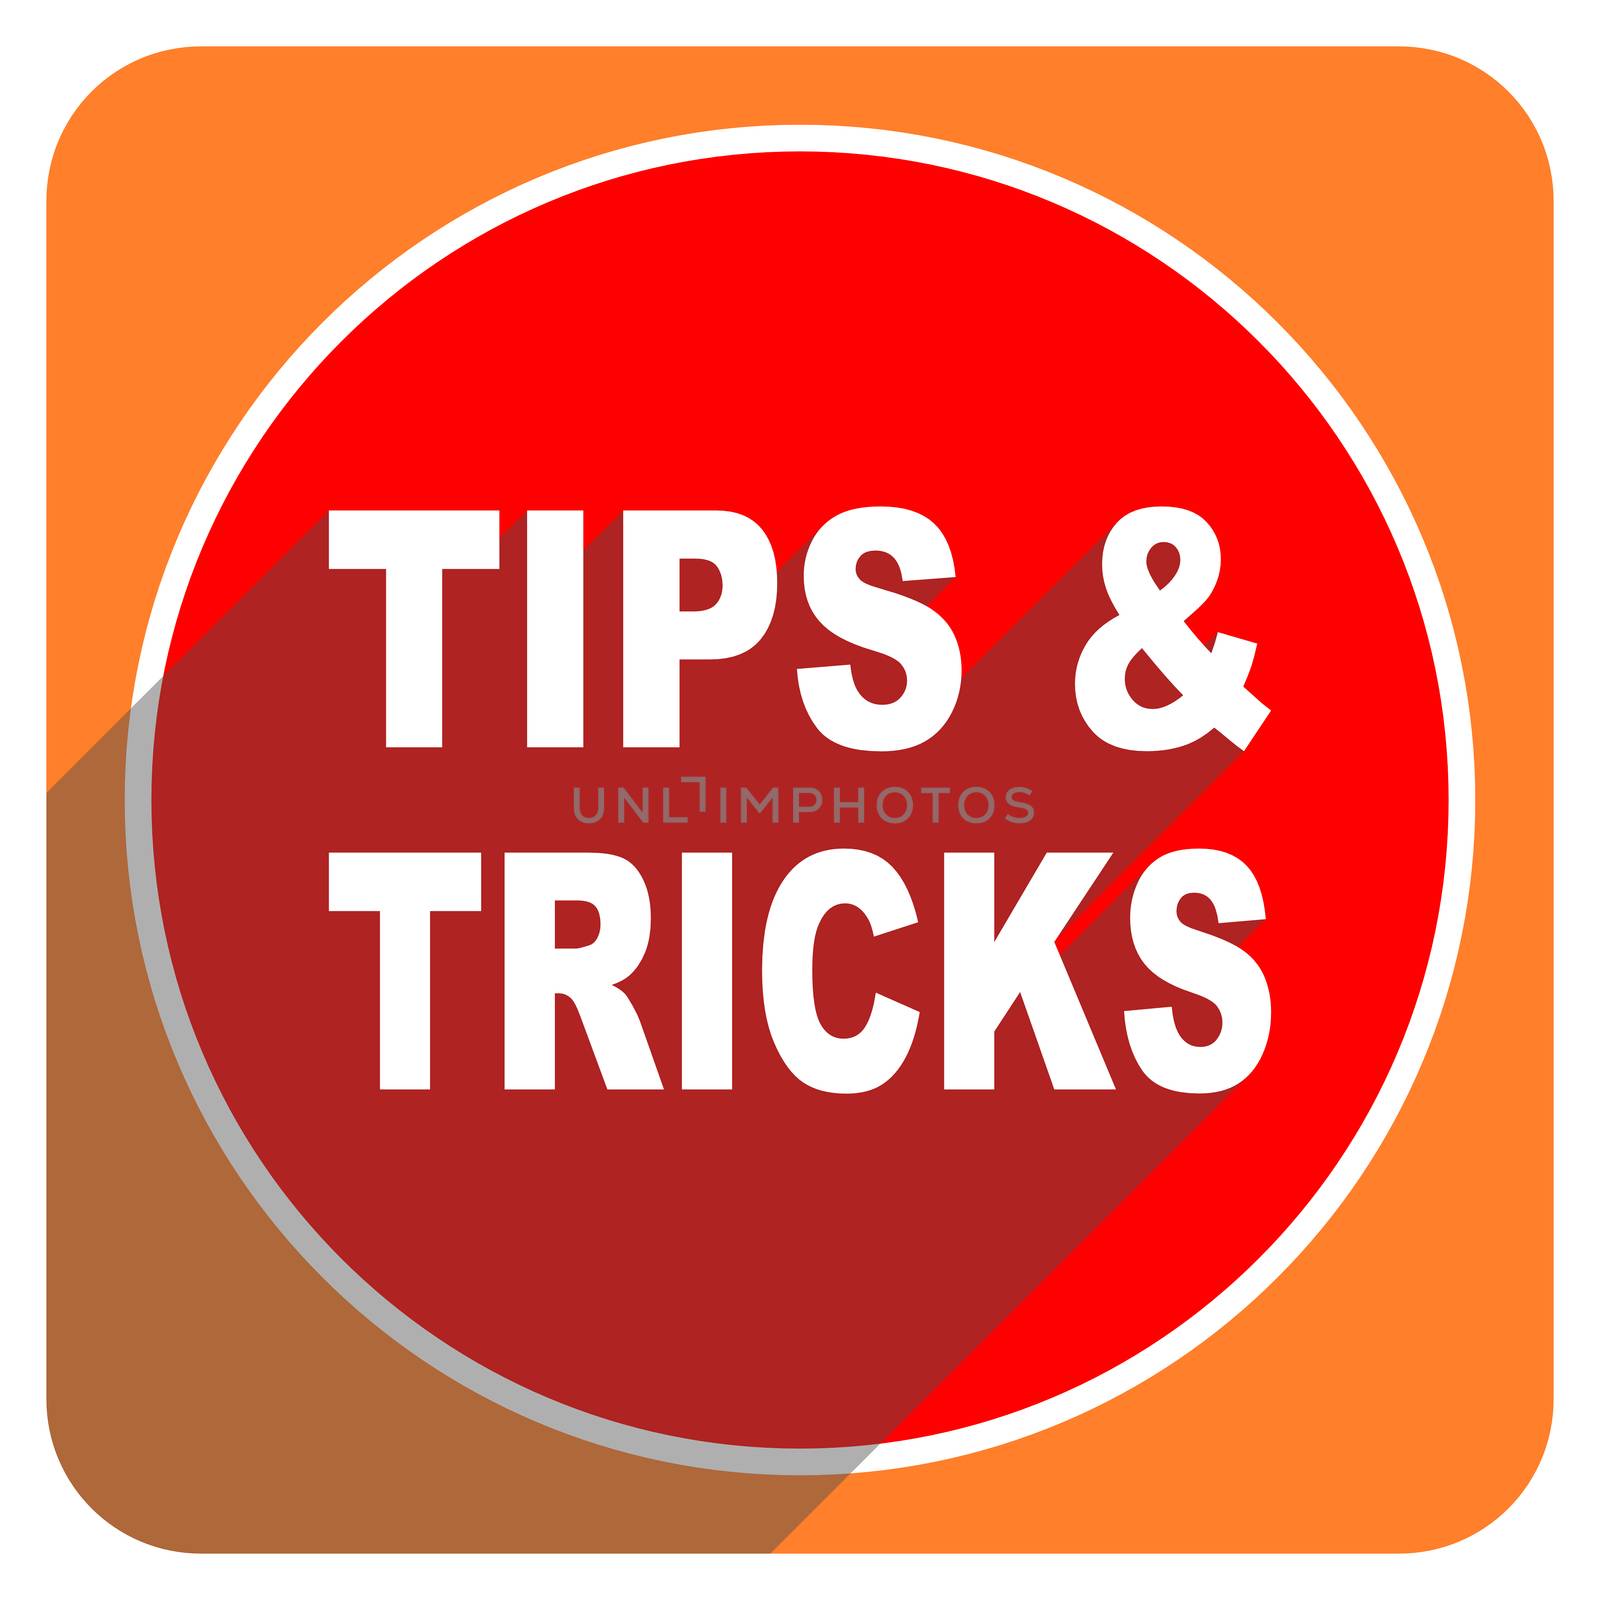 tips tricks red flat icon isolated